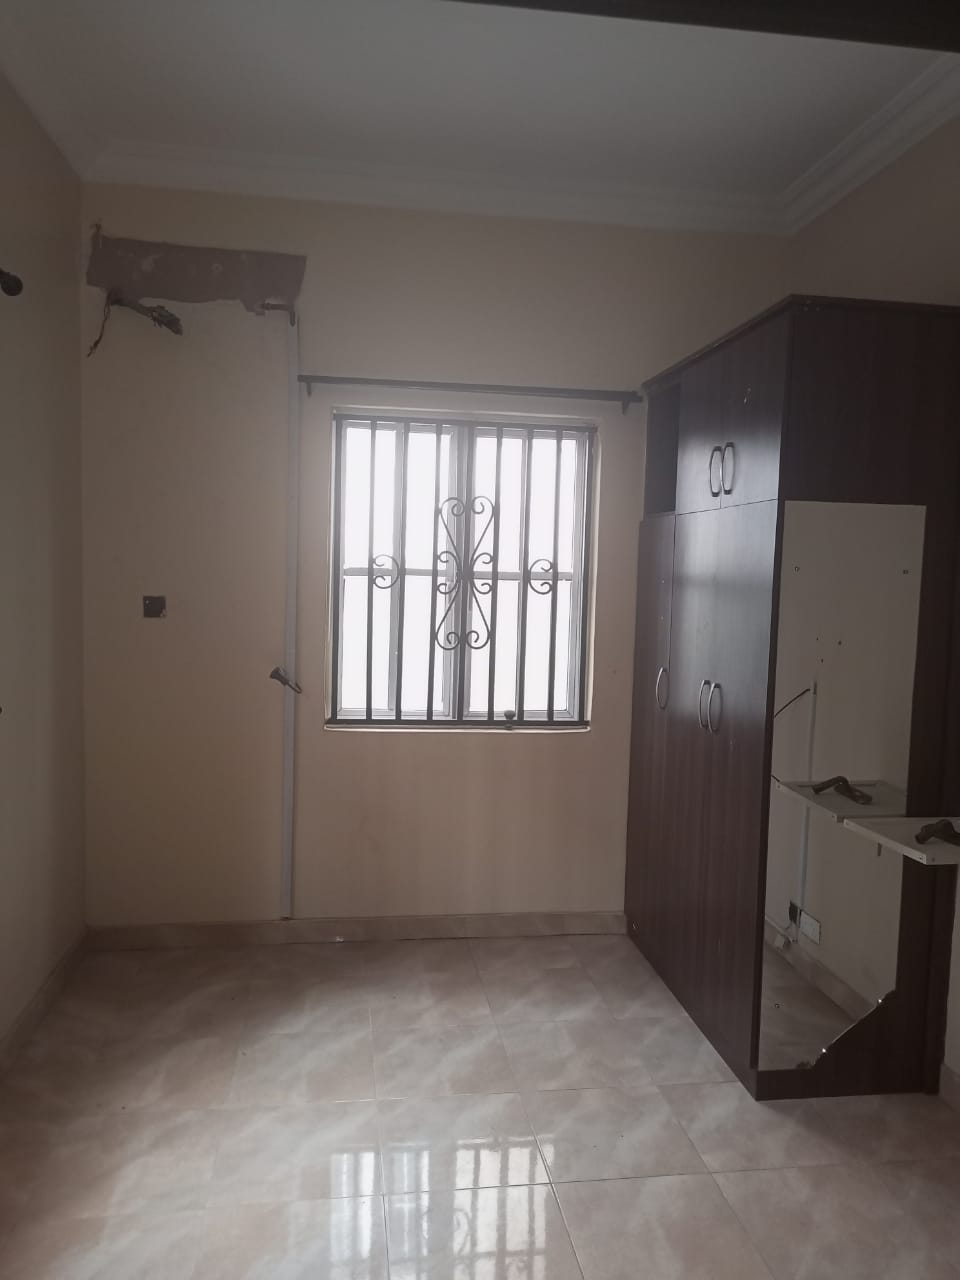 1 room shared apartment in a duplex